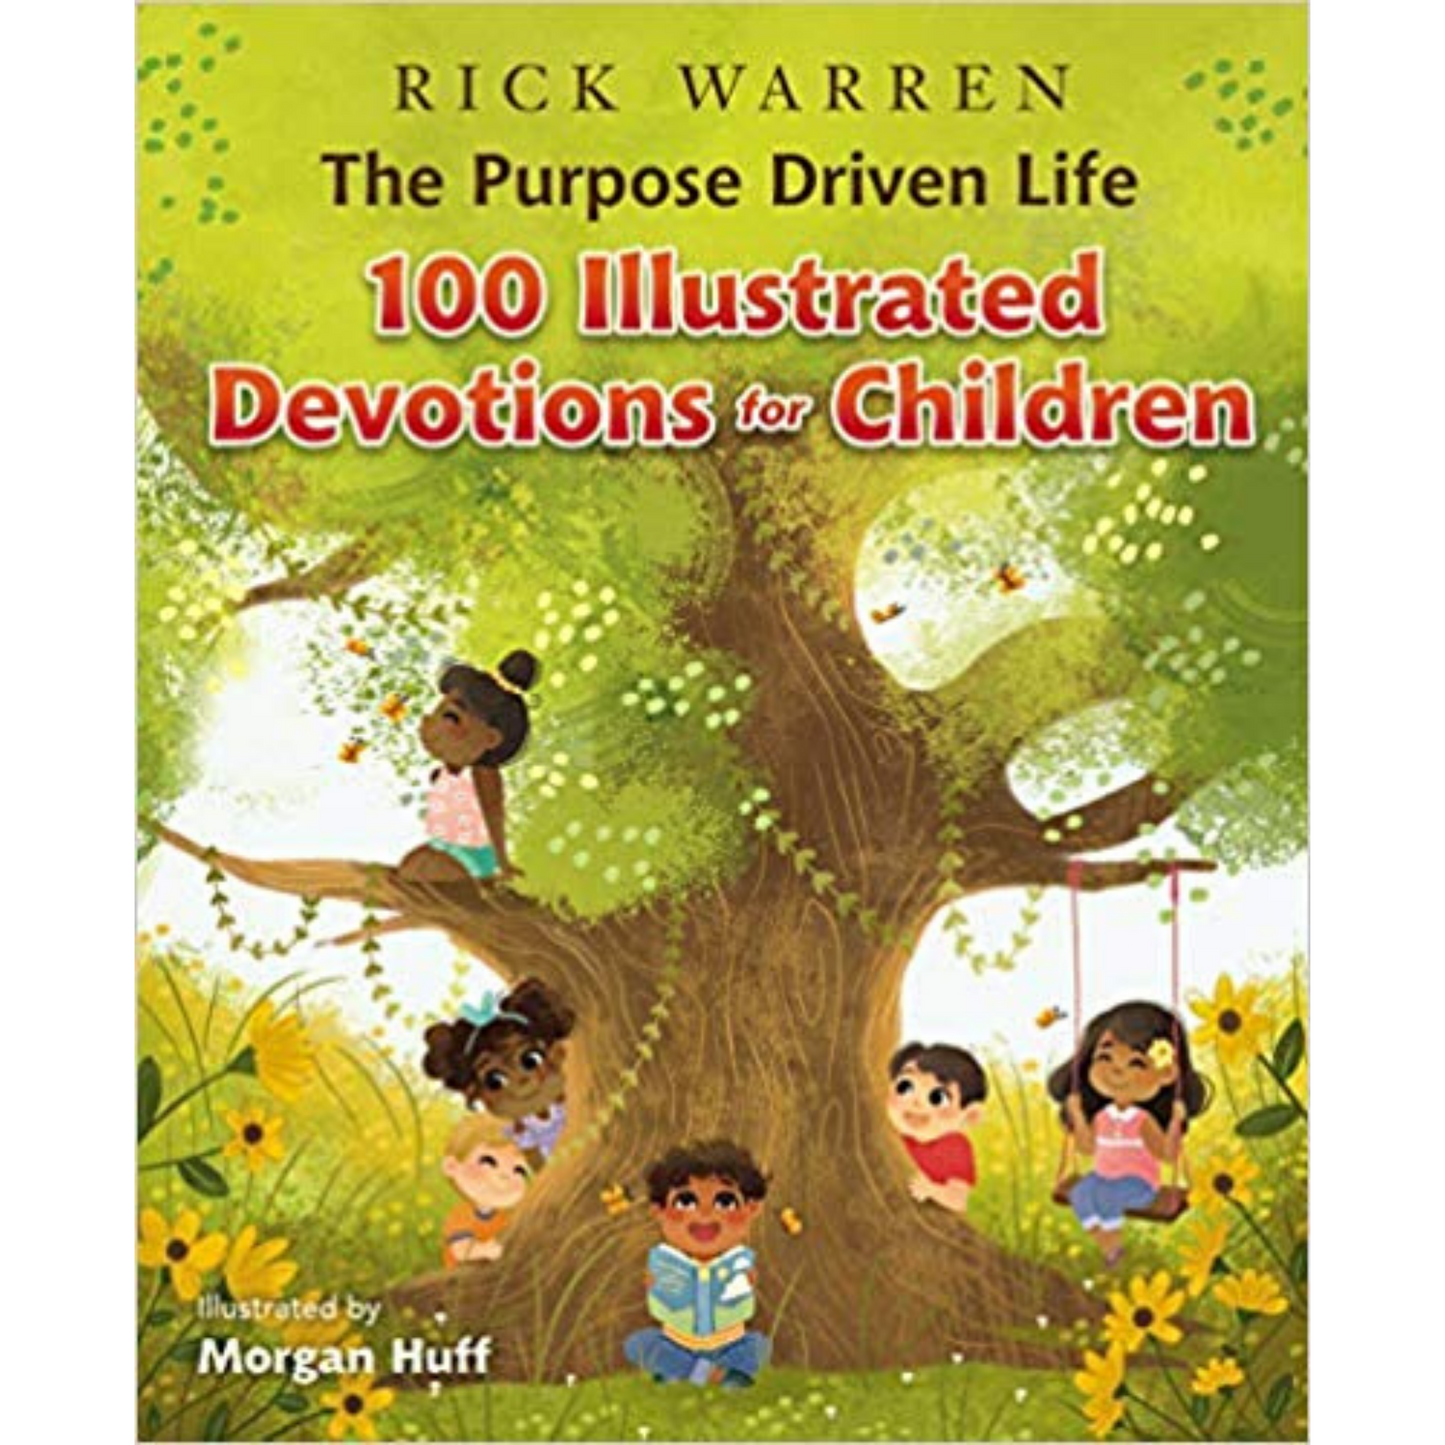 The Purpose Driven Life: 100 Illustrated Devotions for Children